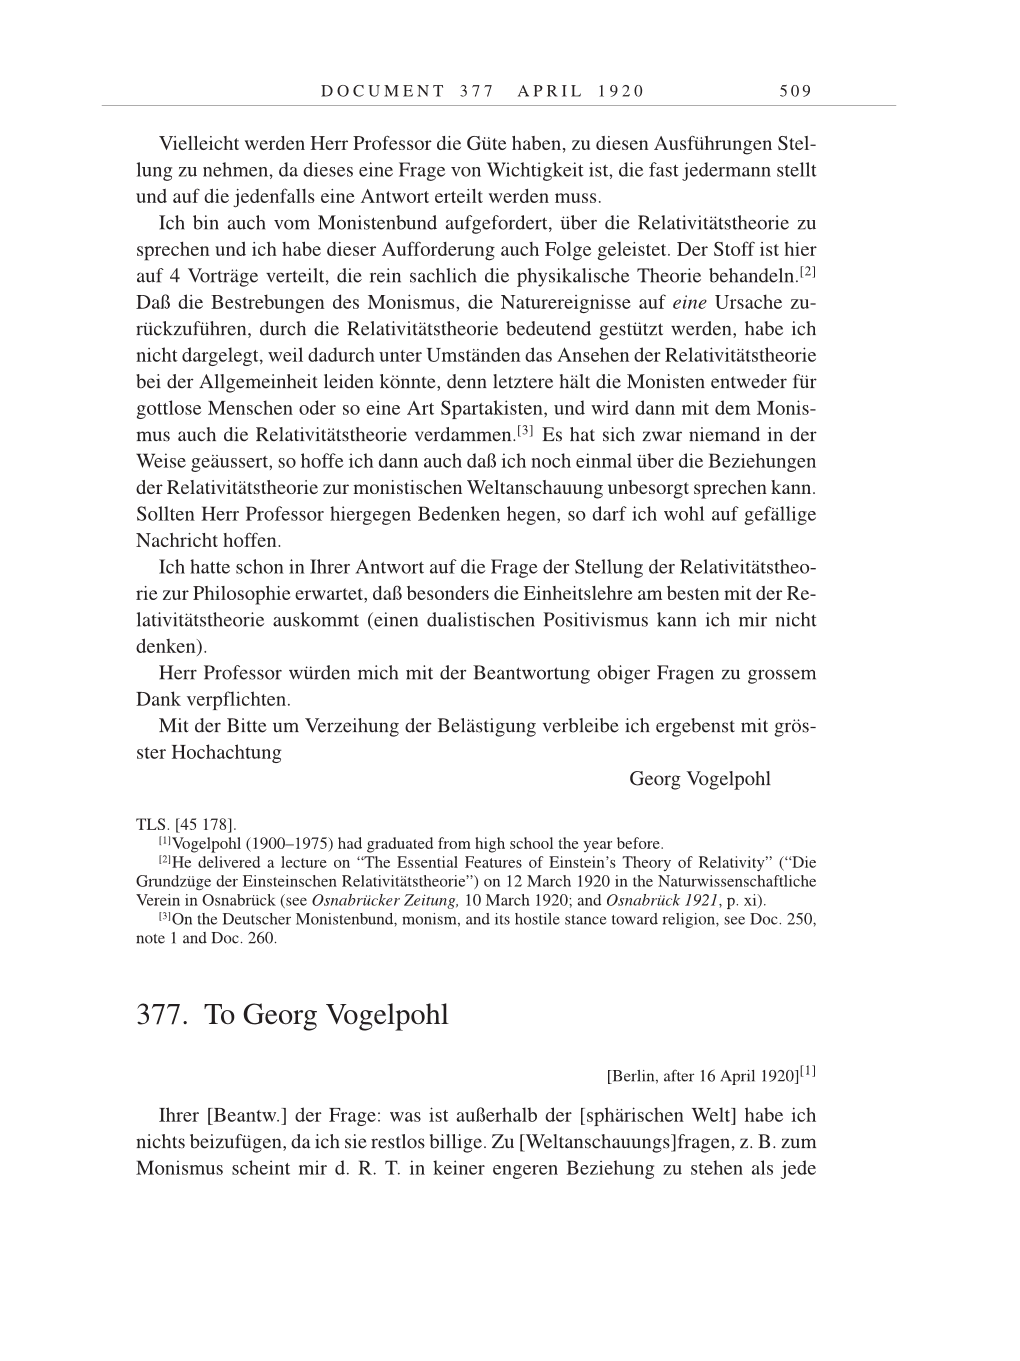 Volume 9: The Berlin Years: Correspondence January 1919-April 1920 page 509